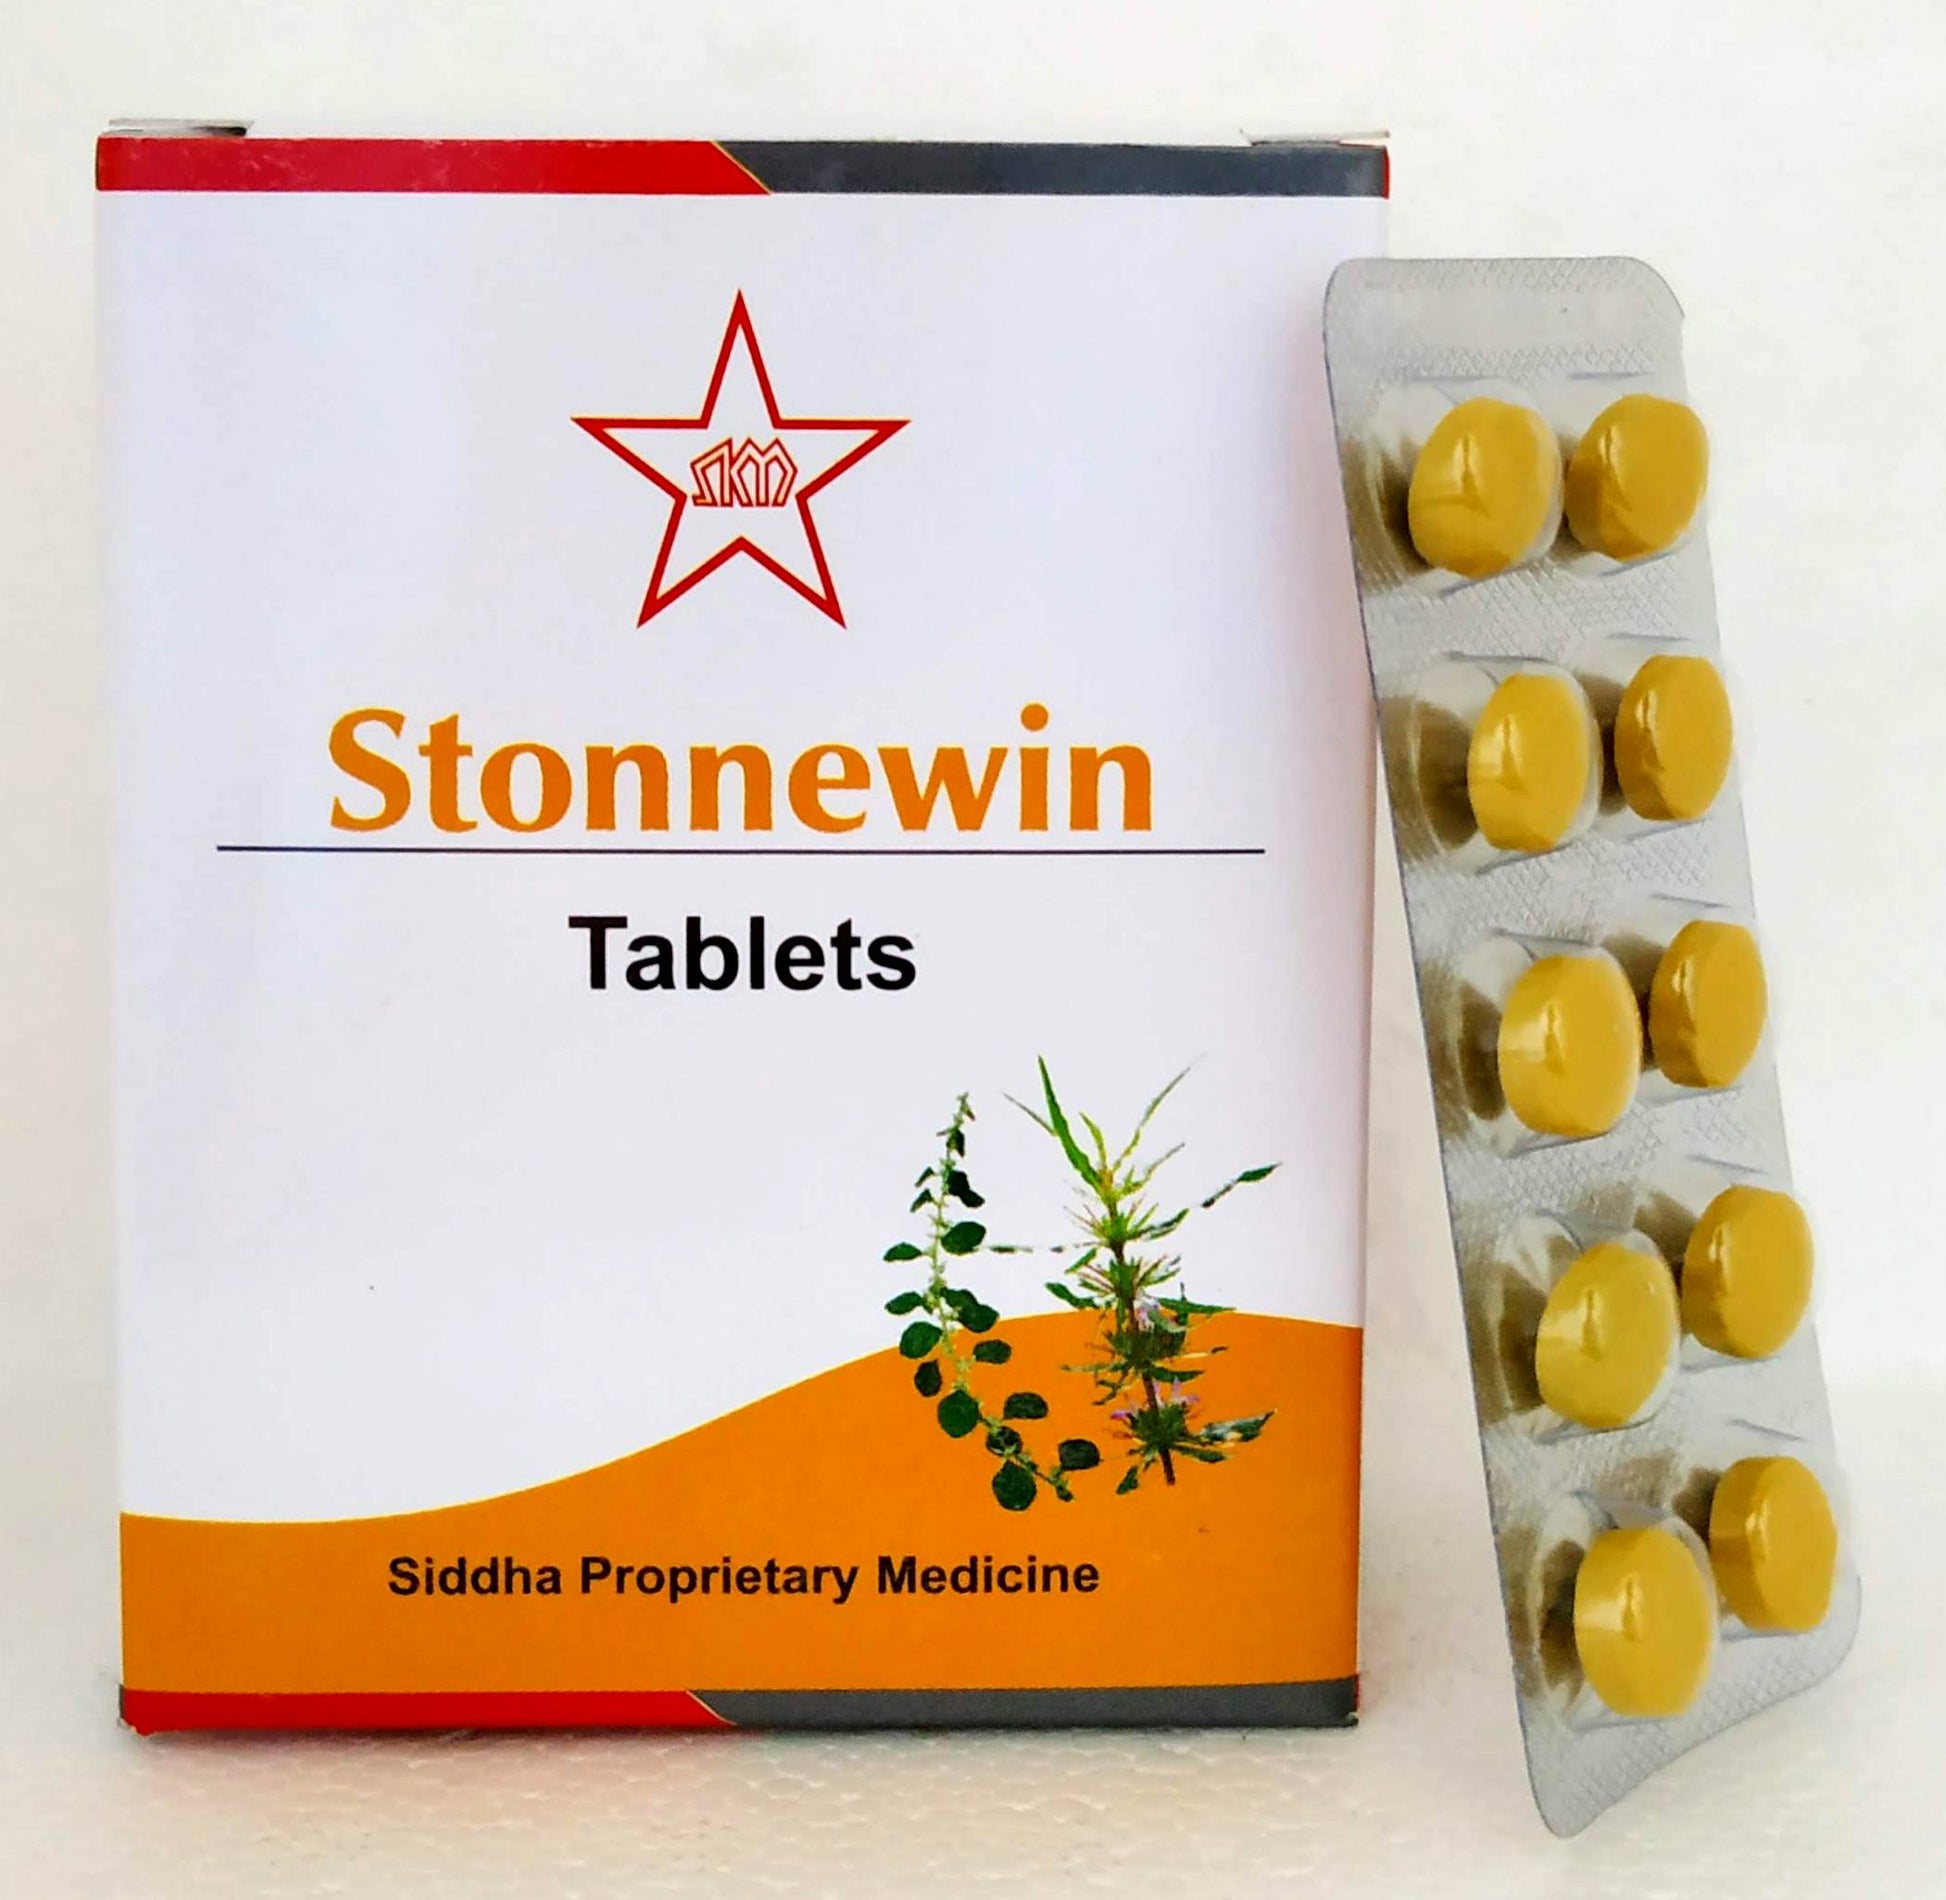 Shop Stonnewin Tablets - 10Tablets at price 27.50 from SKM Online - Ayush Care